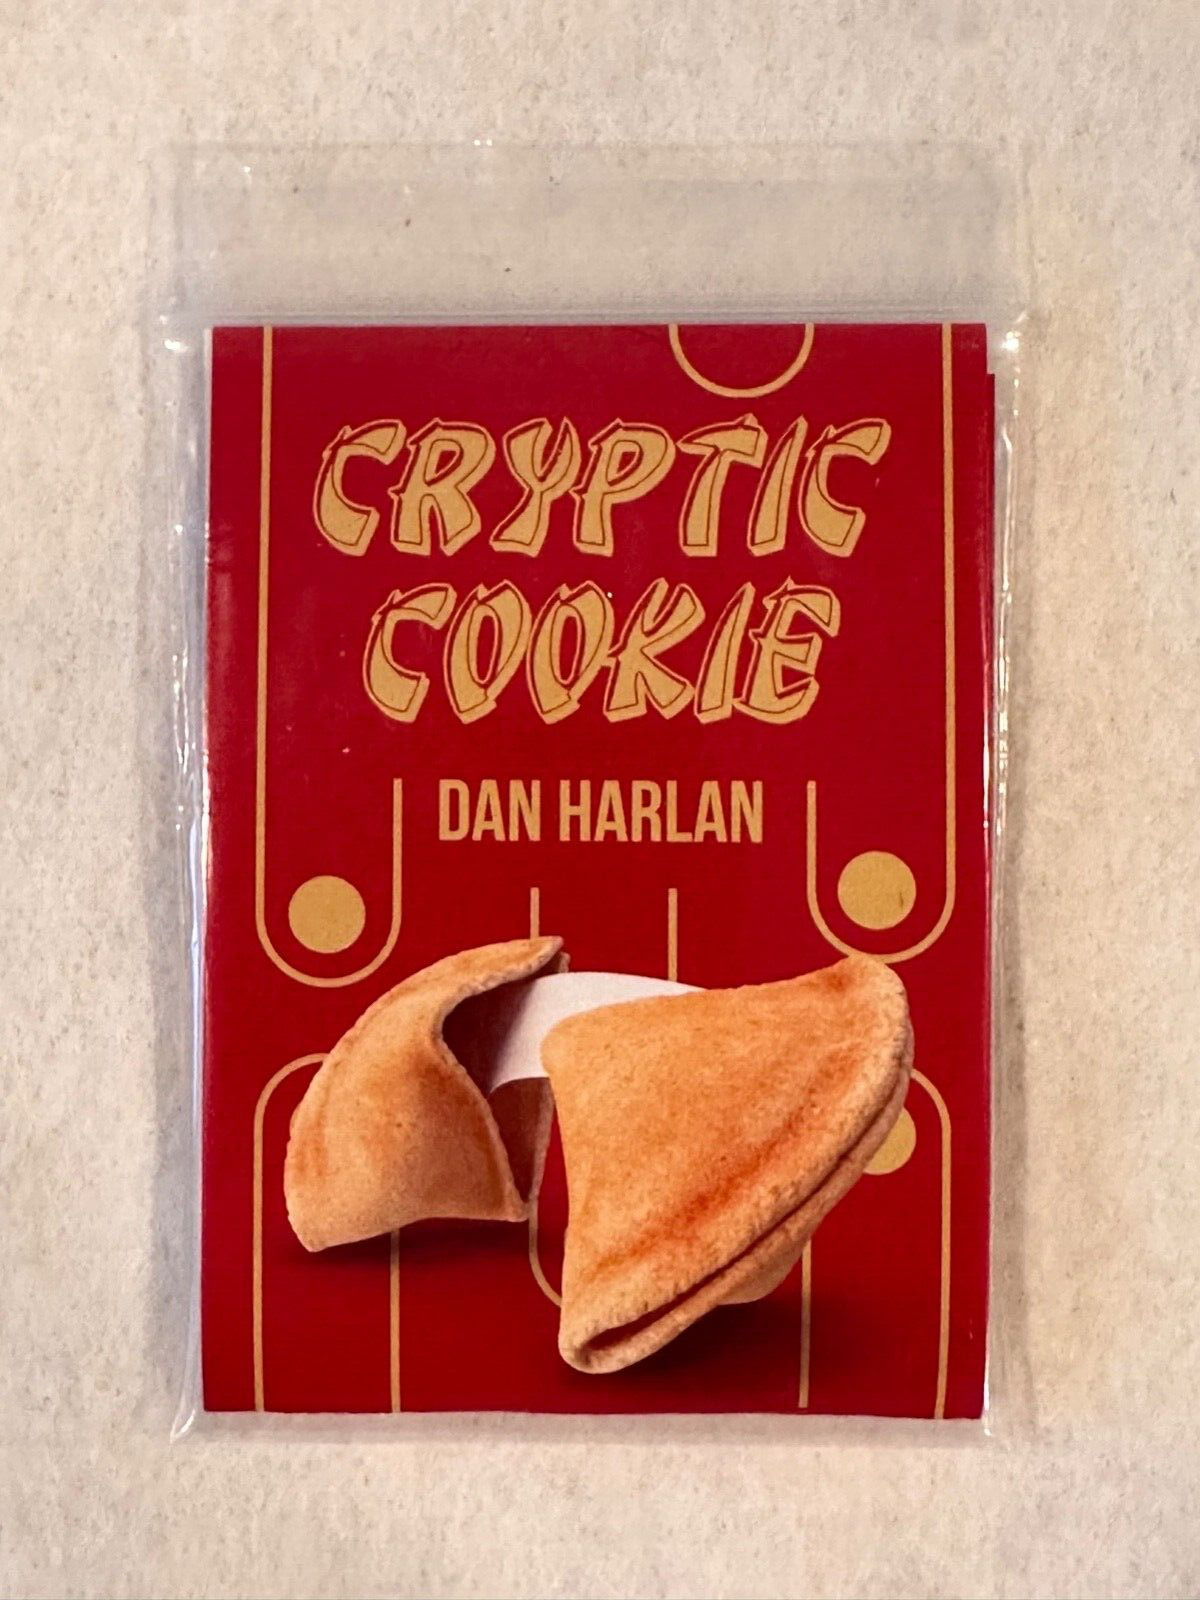 NEW: Cryptic Cookie by Dan Harlan - Magic Trick - Gimmicks & Online Instructions